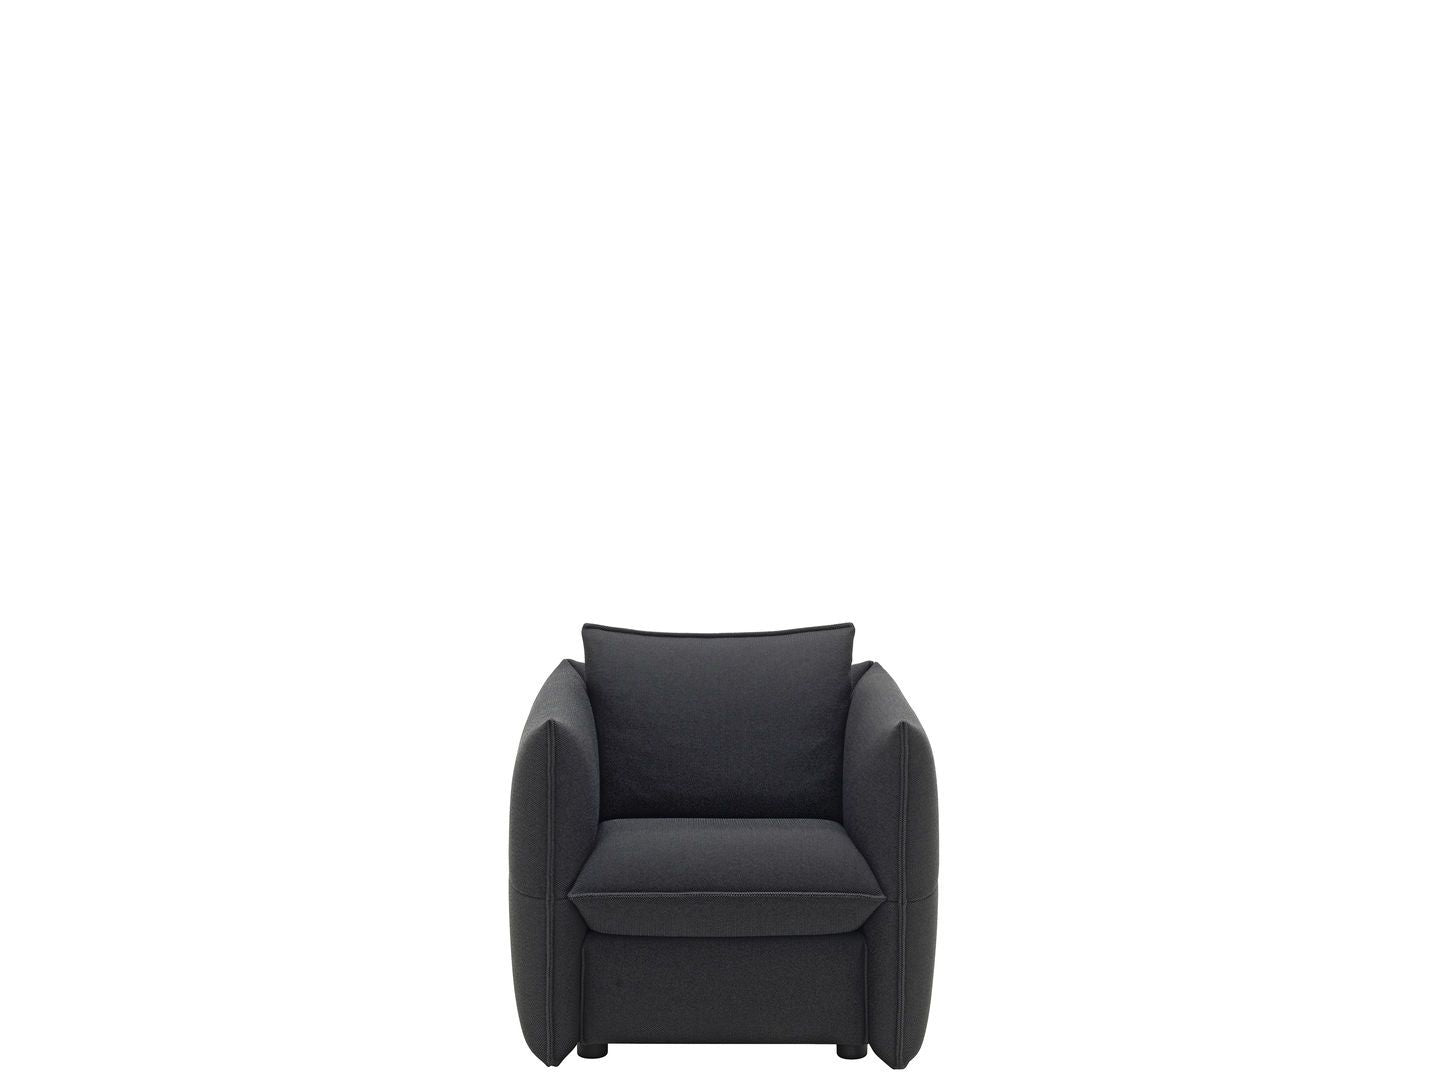 Vitra Mariposa Club Armchair - A stylish and comfortable armchair perfect for any living room